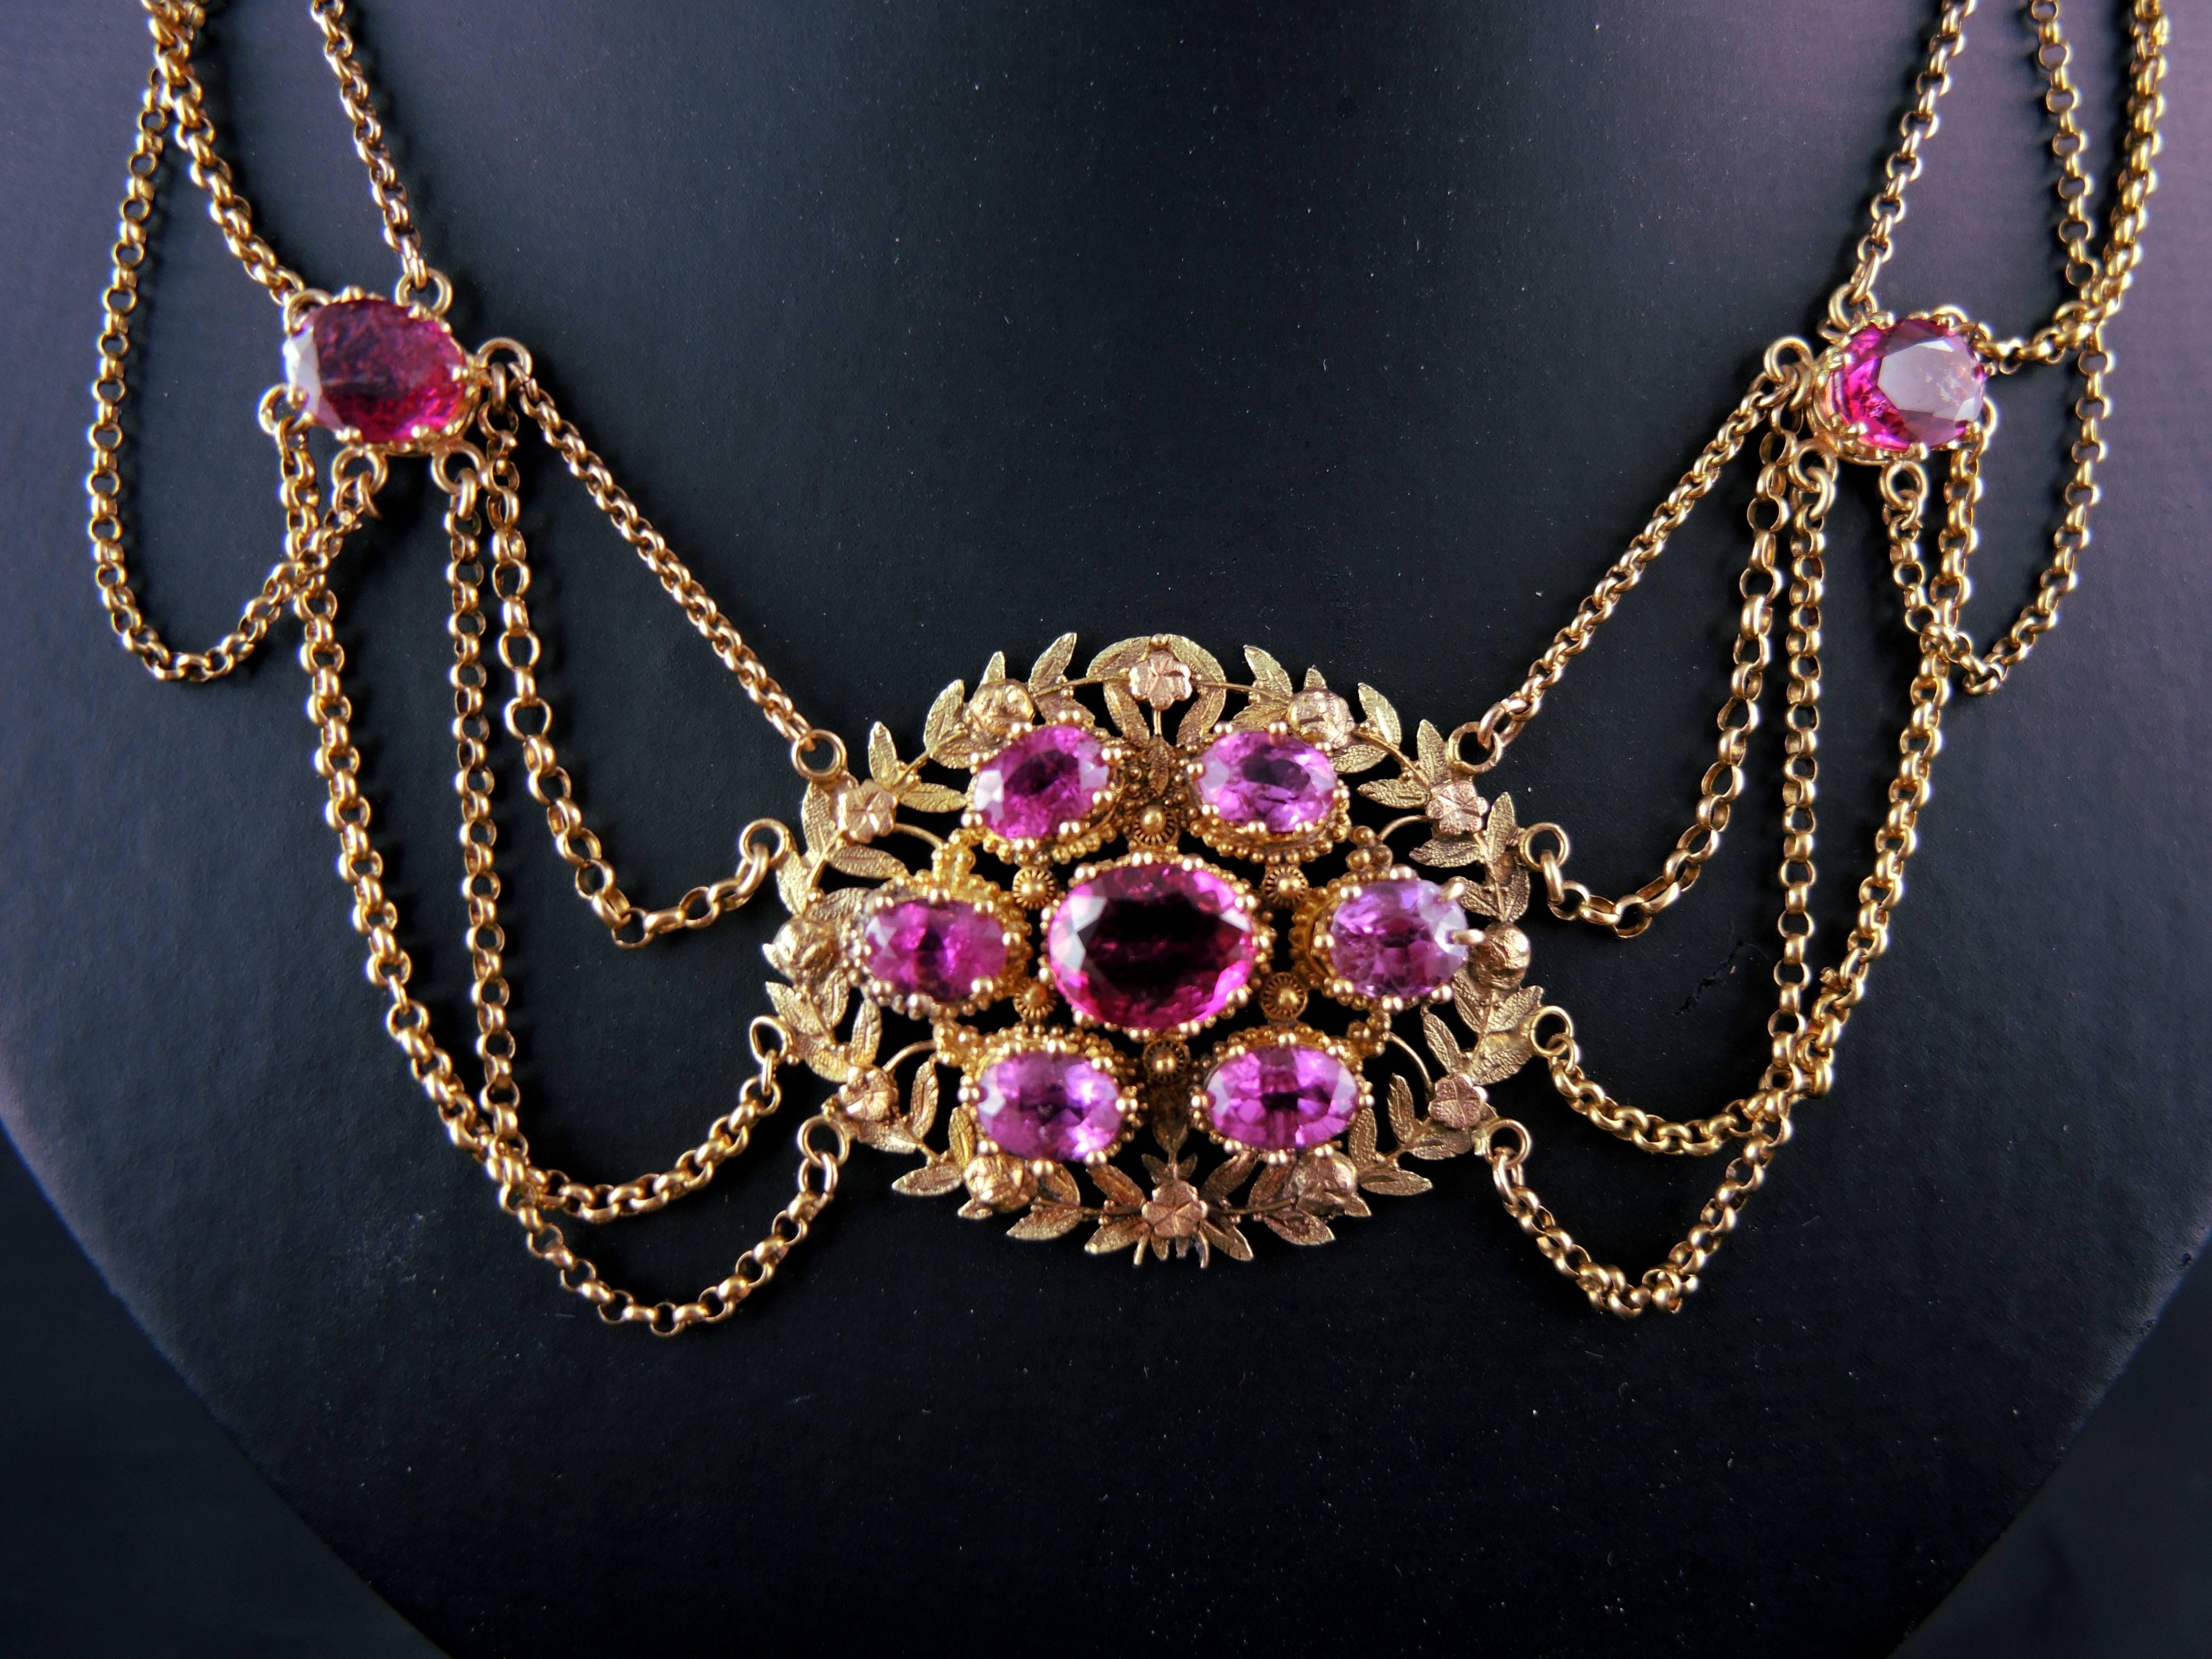 An extraordinary hand crafted Collier d’Esclavage made in 18kt and 14kt gold (quality marks: owl and scallop). Multi strands with links are caught by a central chiselled plaque set with beautiful vivid pink tourmalines

Work from the early 19th